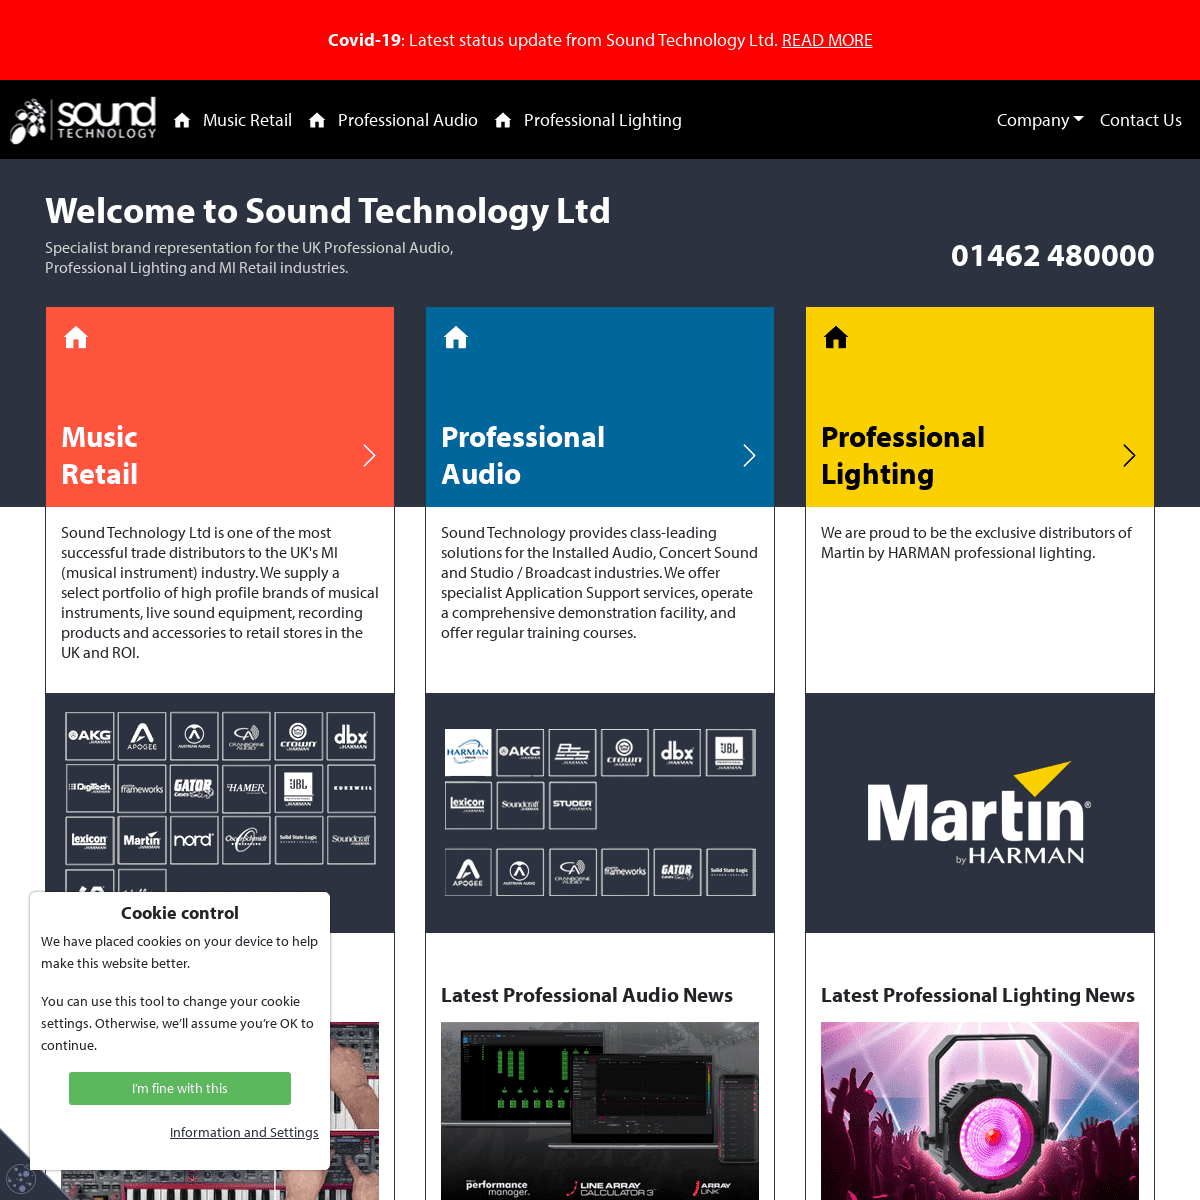 A complete backup of https://soundtech.co.uk